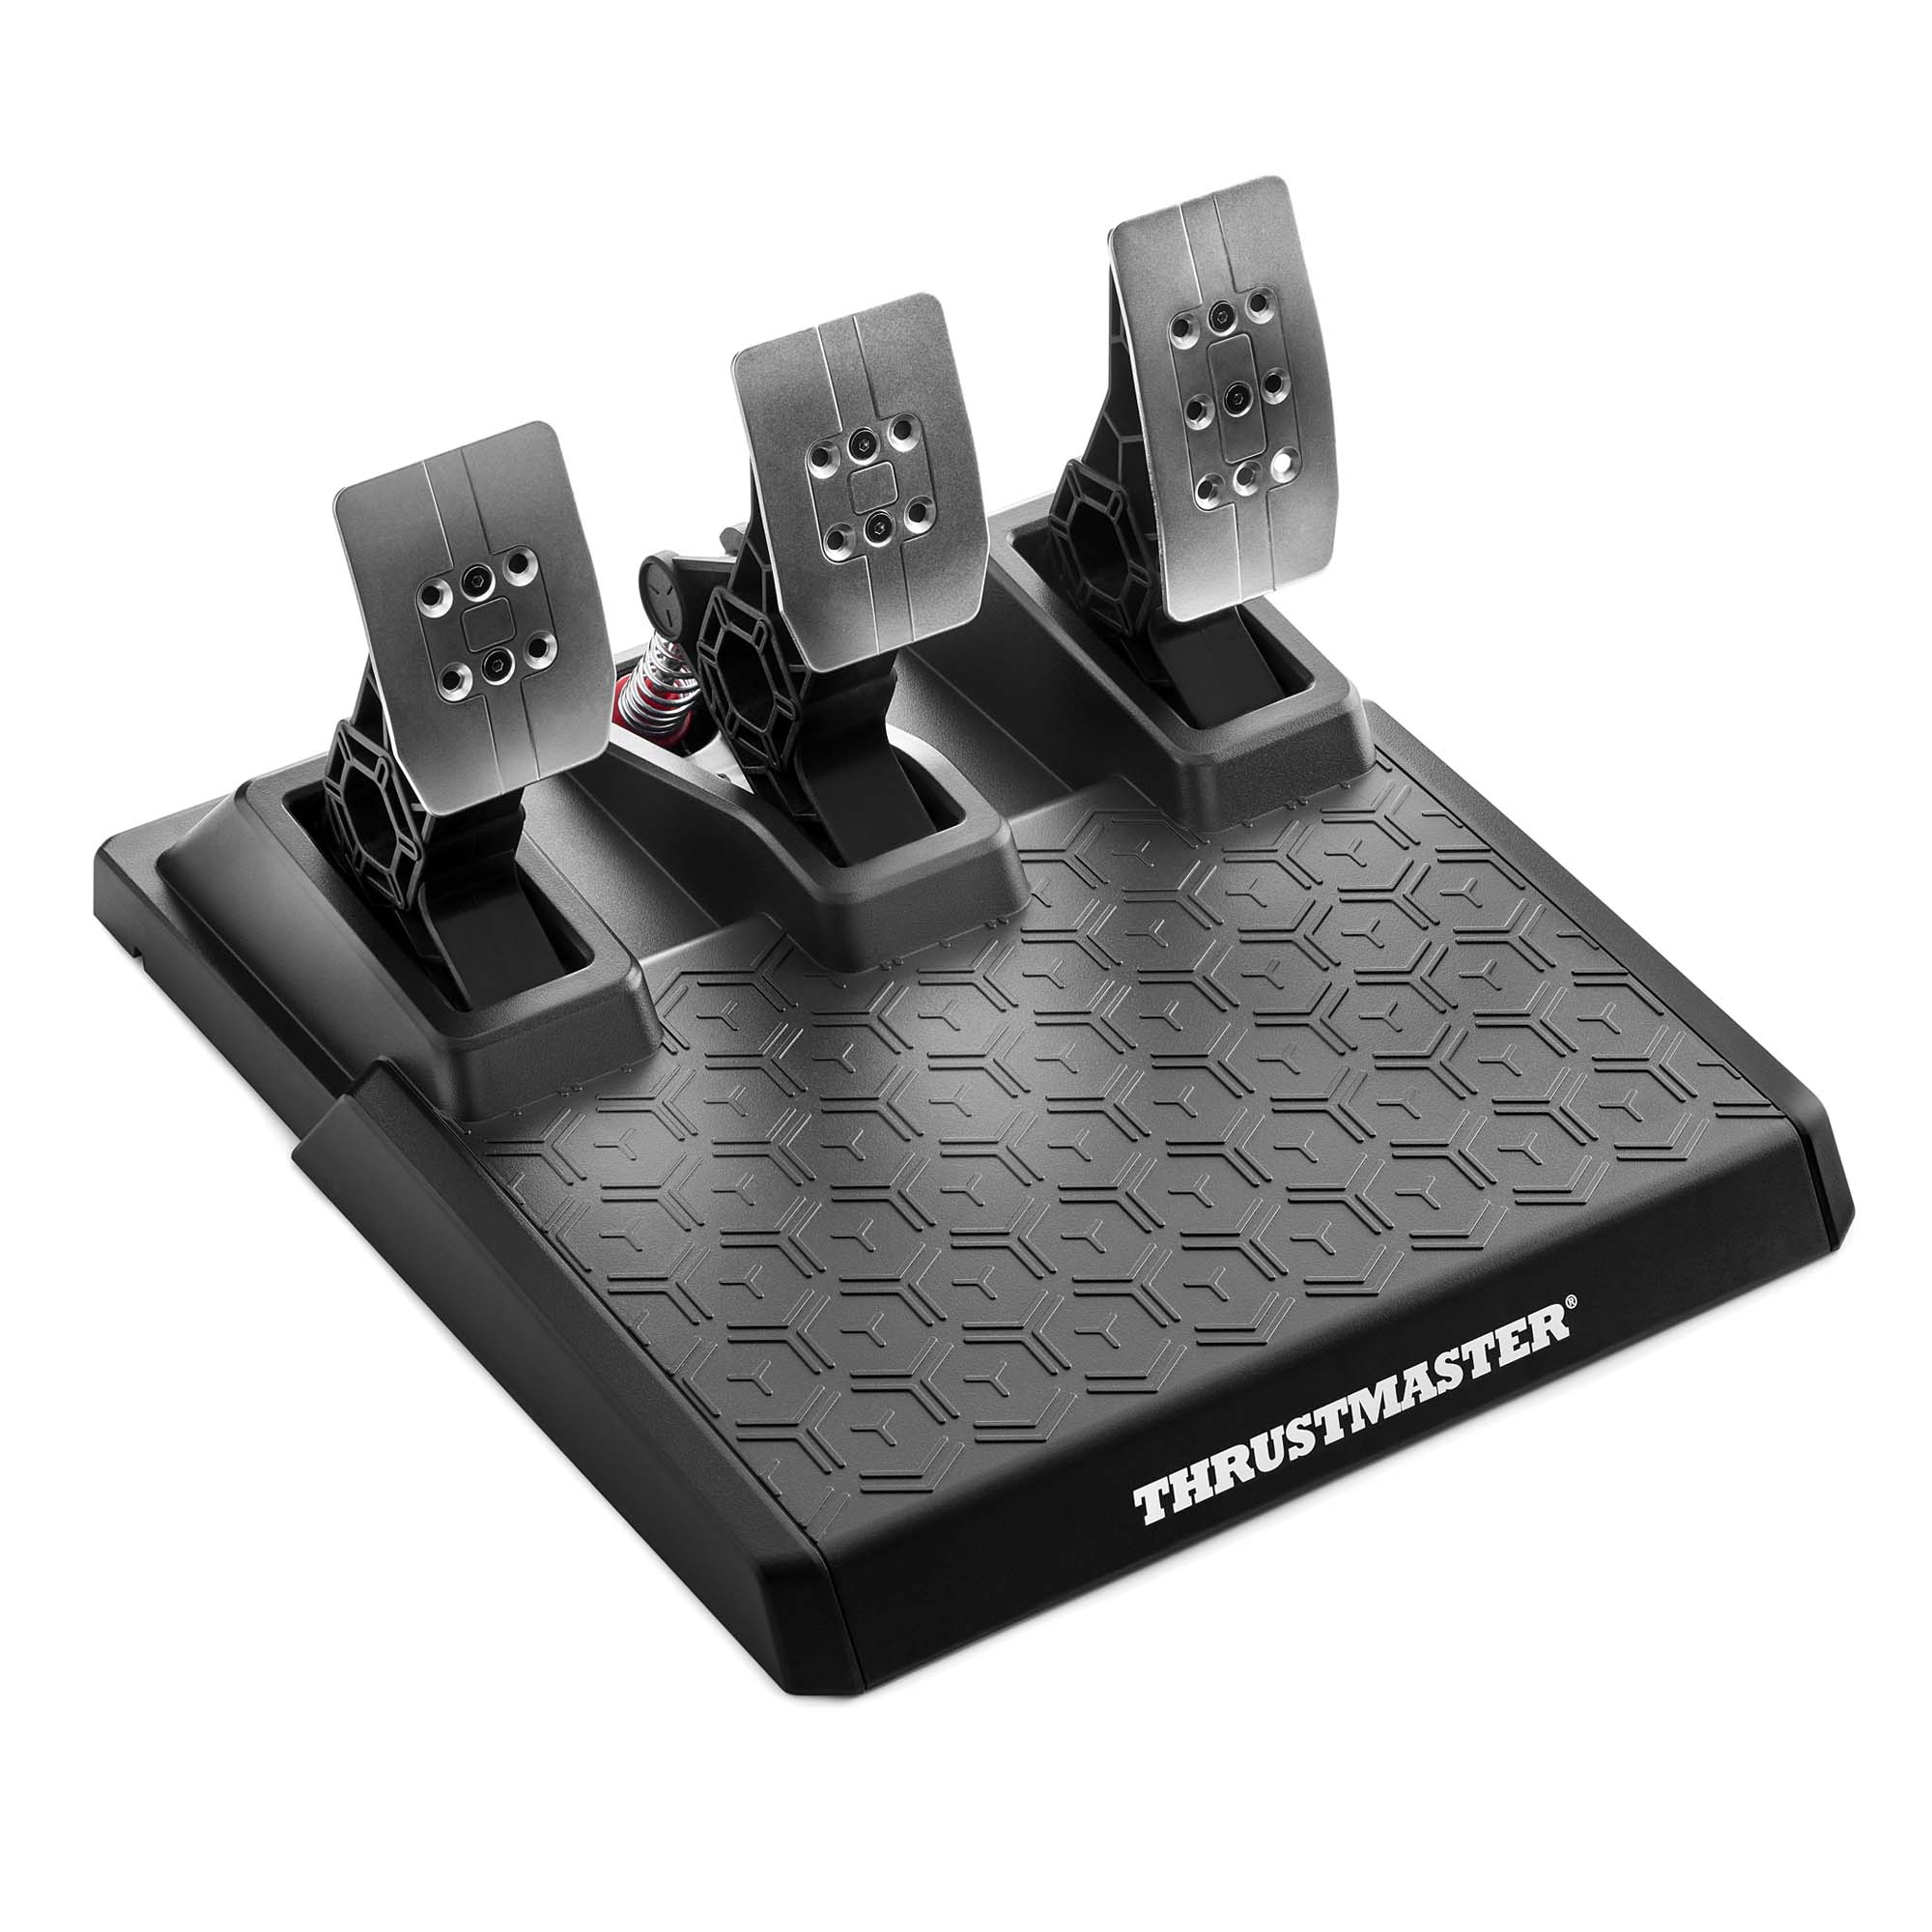 Is it possible to use the Thrustmaster T3PA-Pro pedals without the